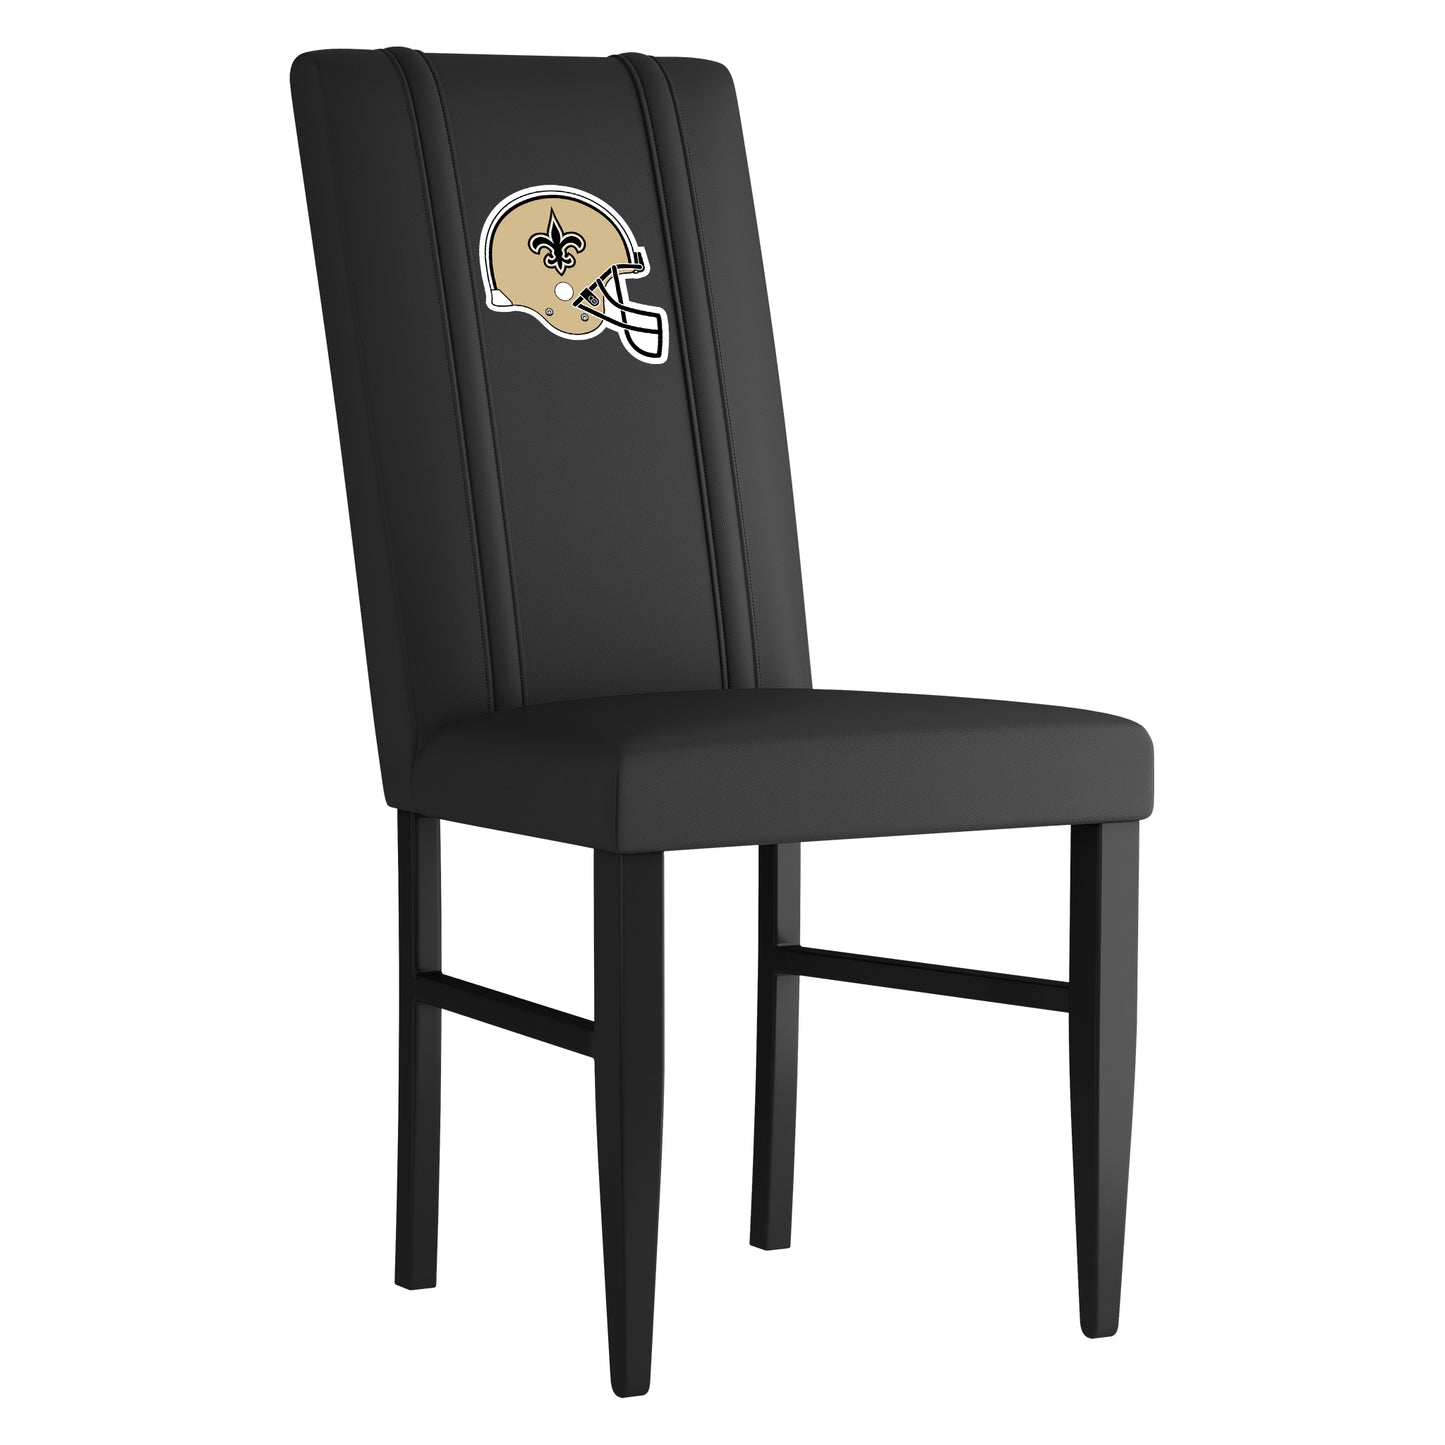 Side Chair 2000 with  New Orleans Saints Helmet Logo Set of 2